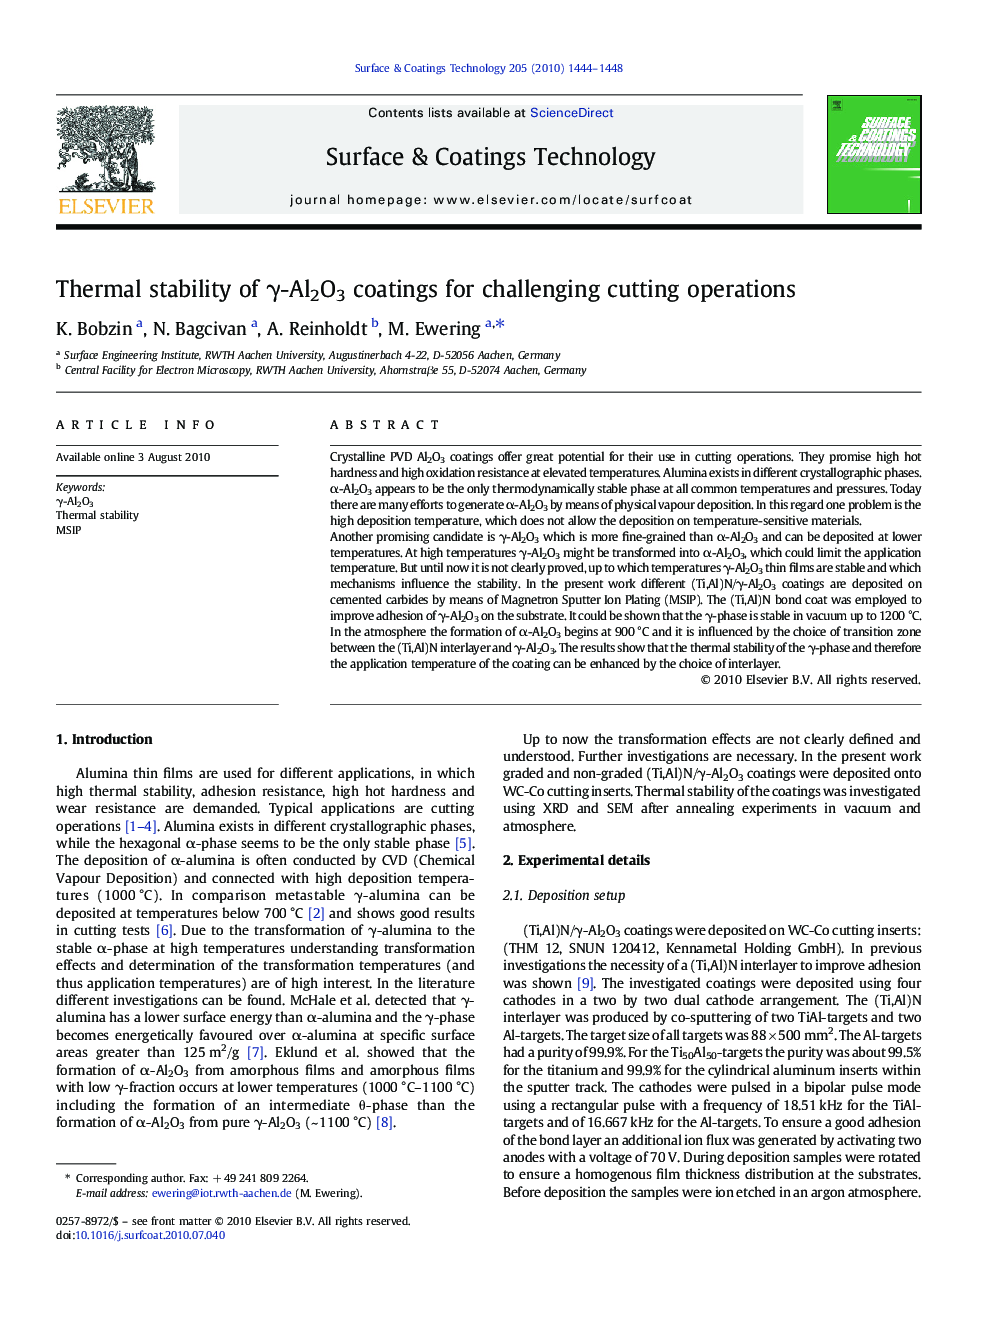 Thermal stability of γ-Al2O3 coatings for challenging cutting operations